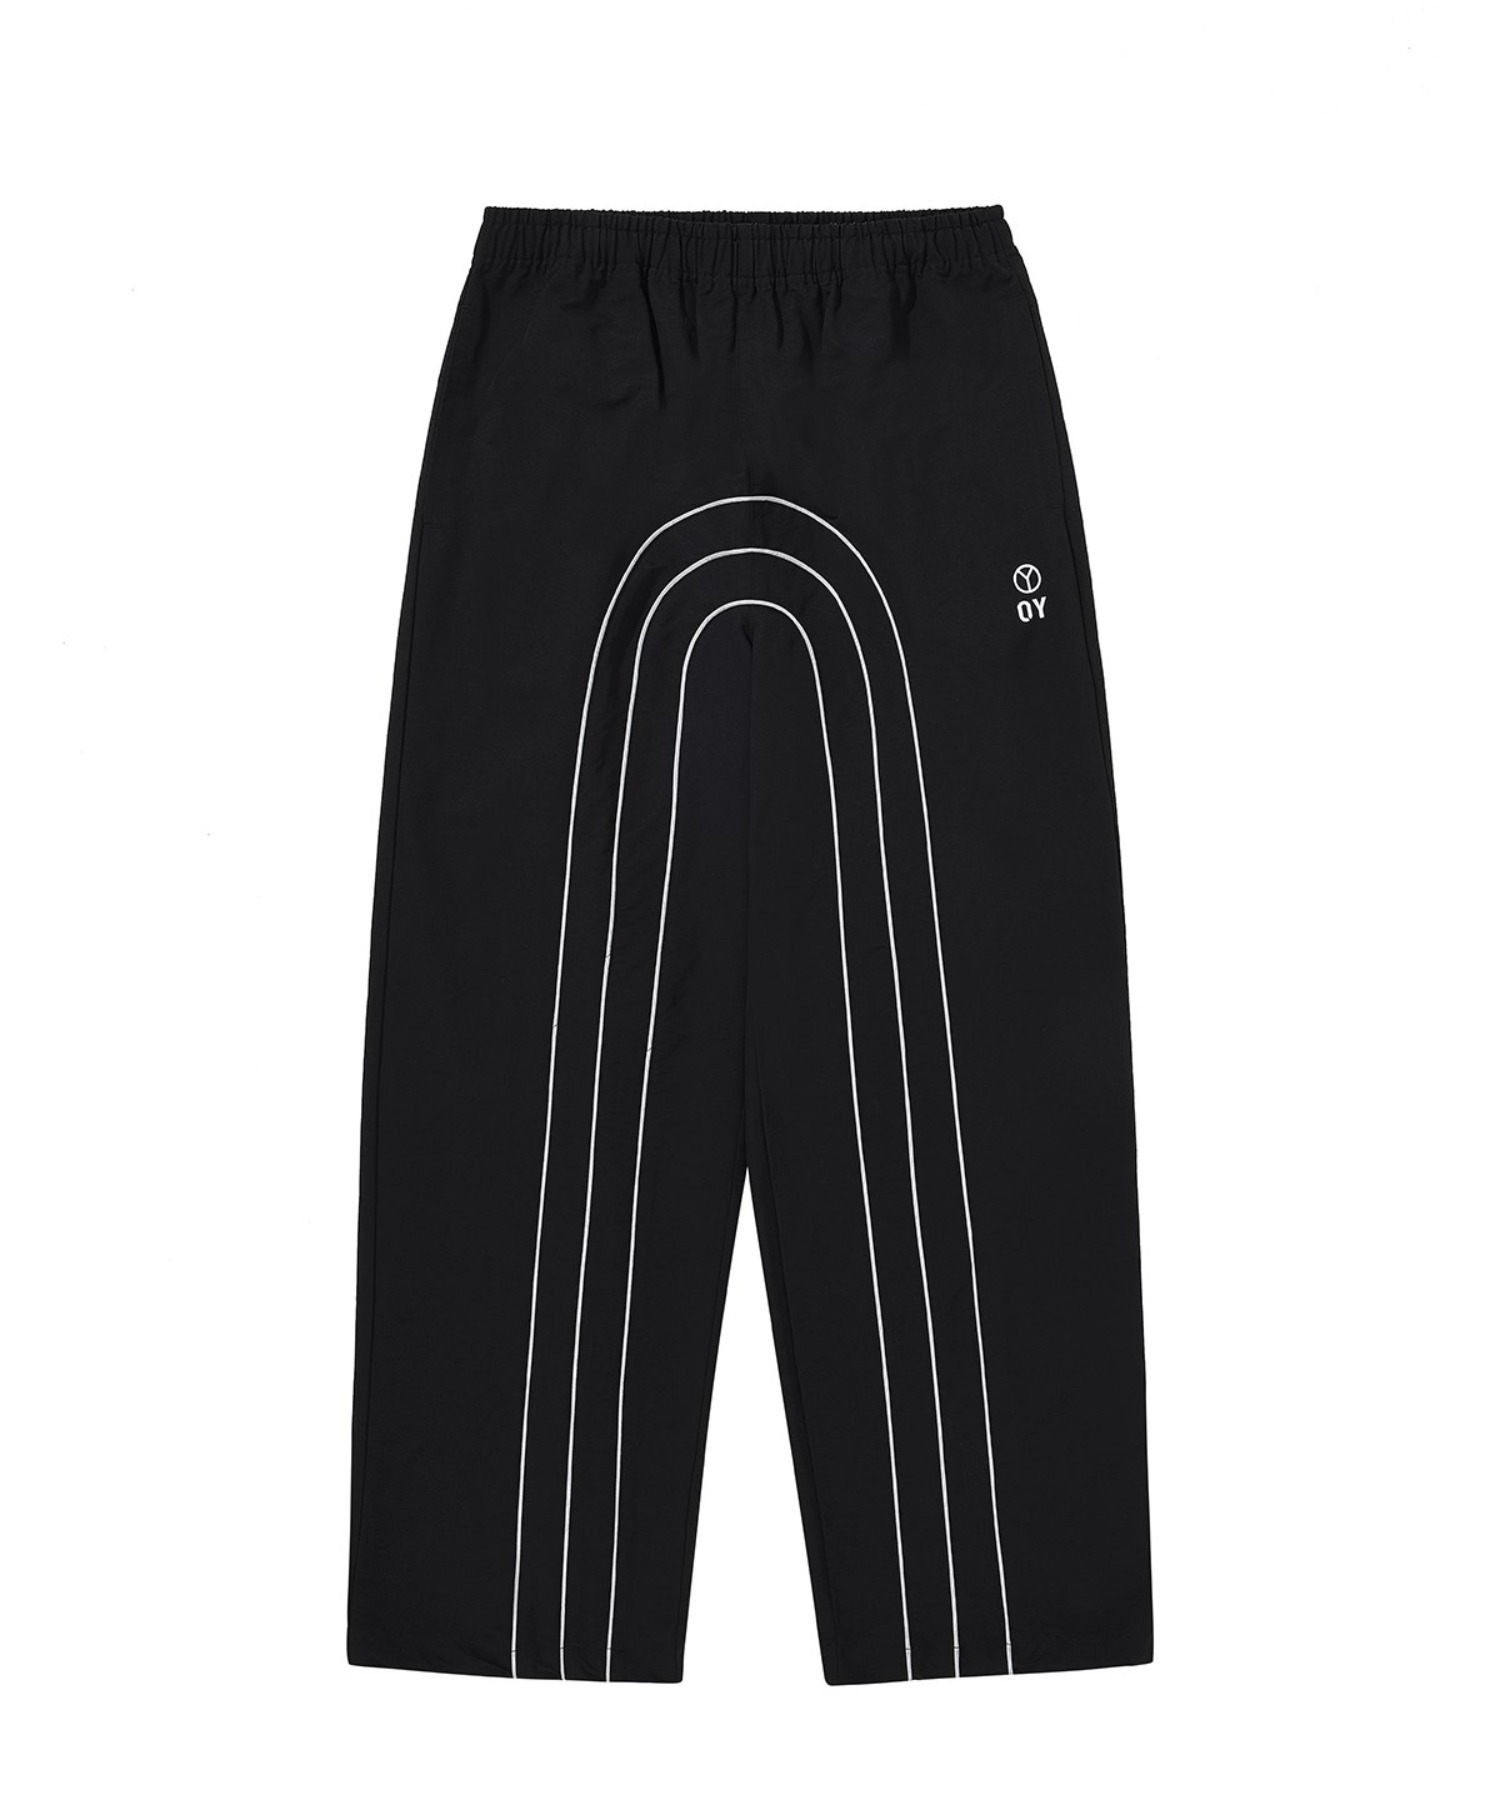 OY/オーワイ』PIPING CURVE LINE TRACK PANTS/パイピング カーブ 